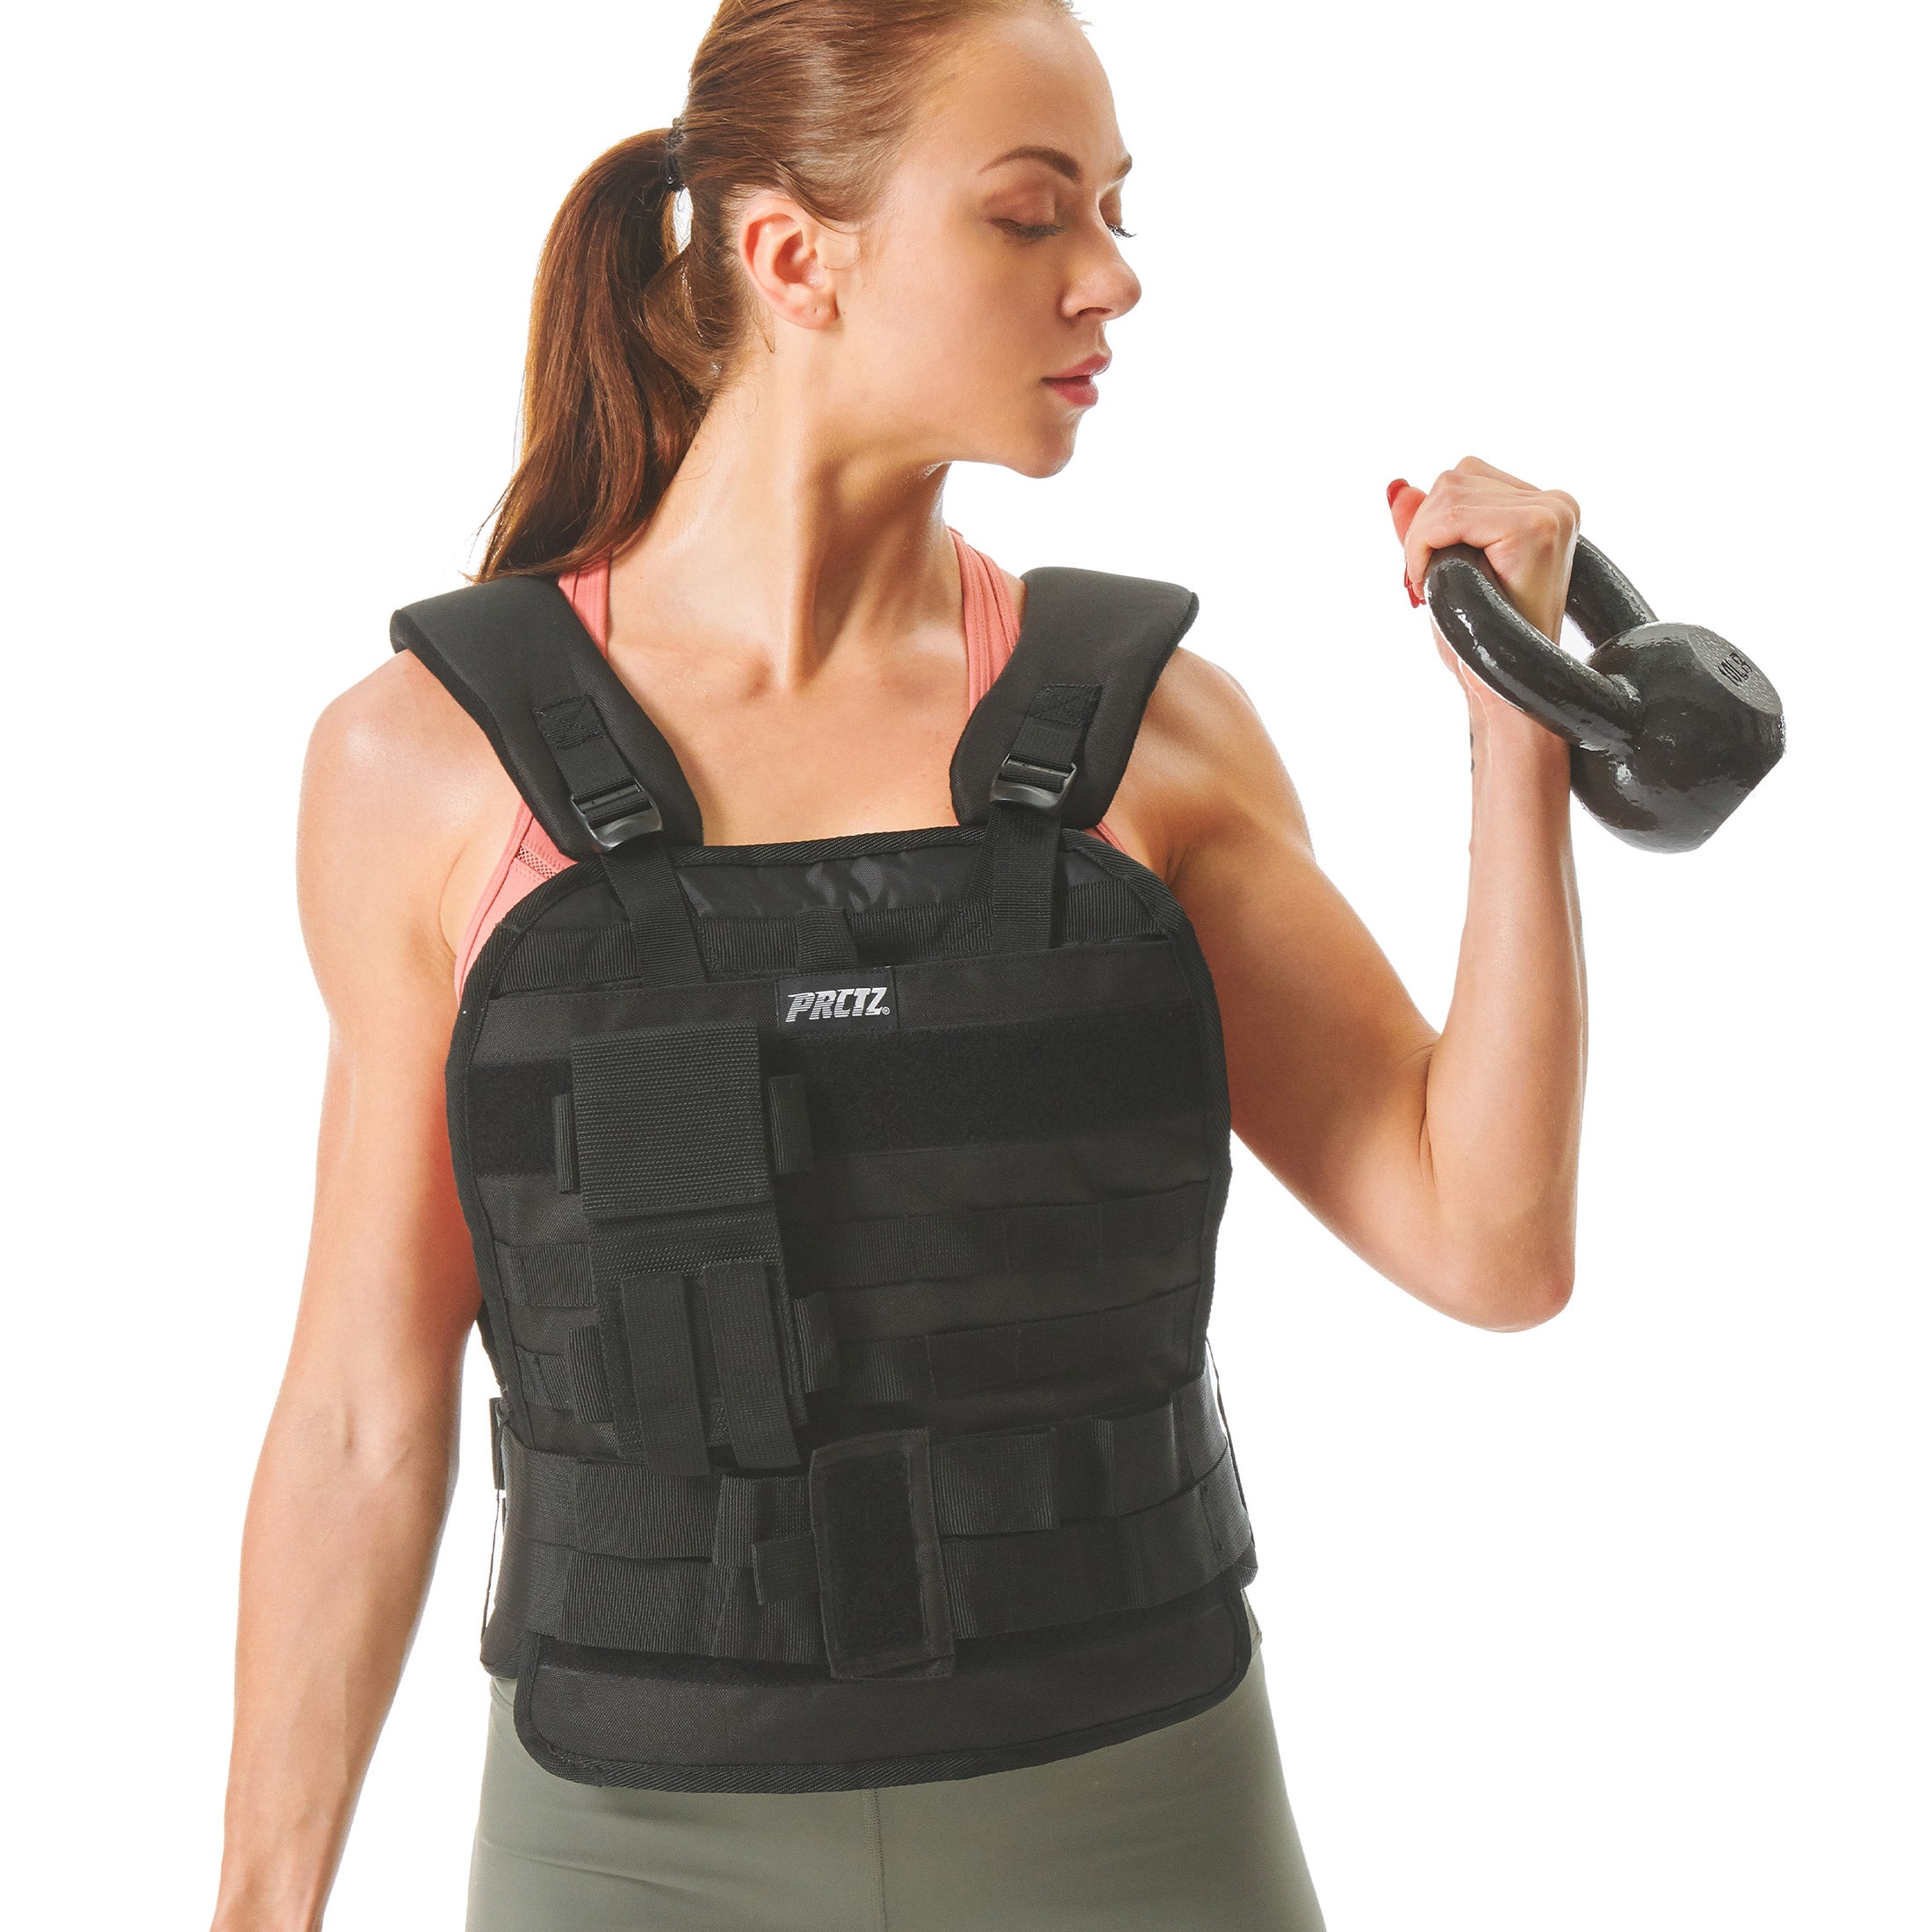 NEWEST- Women's Zipper Front Vest (WV10ZF) Adjustable Height- Contoured Weighted  Vest Adjustable From 1 to 20 Pounds Supplied at 10 lbs. (21)